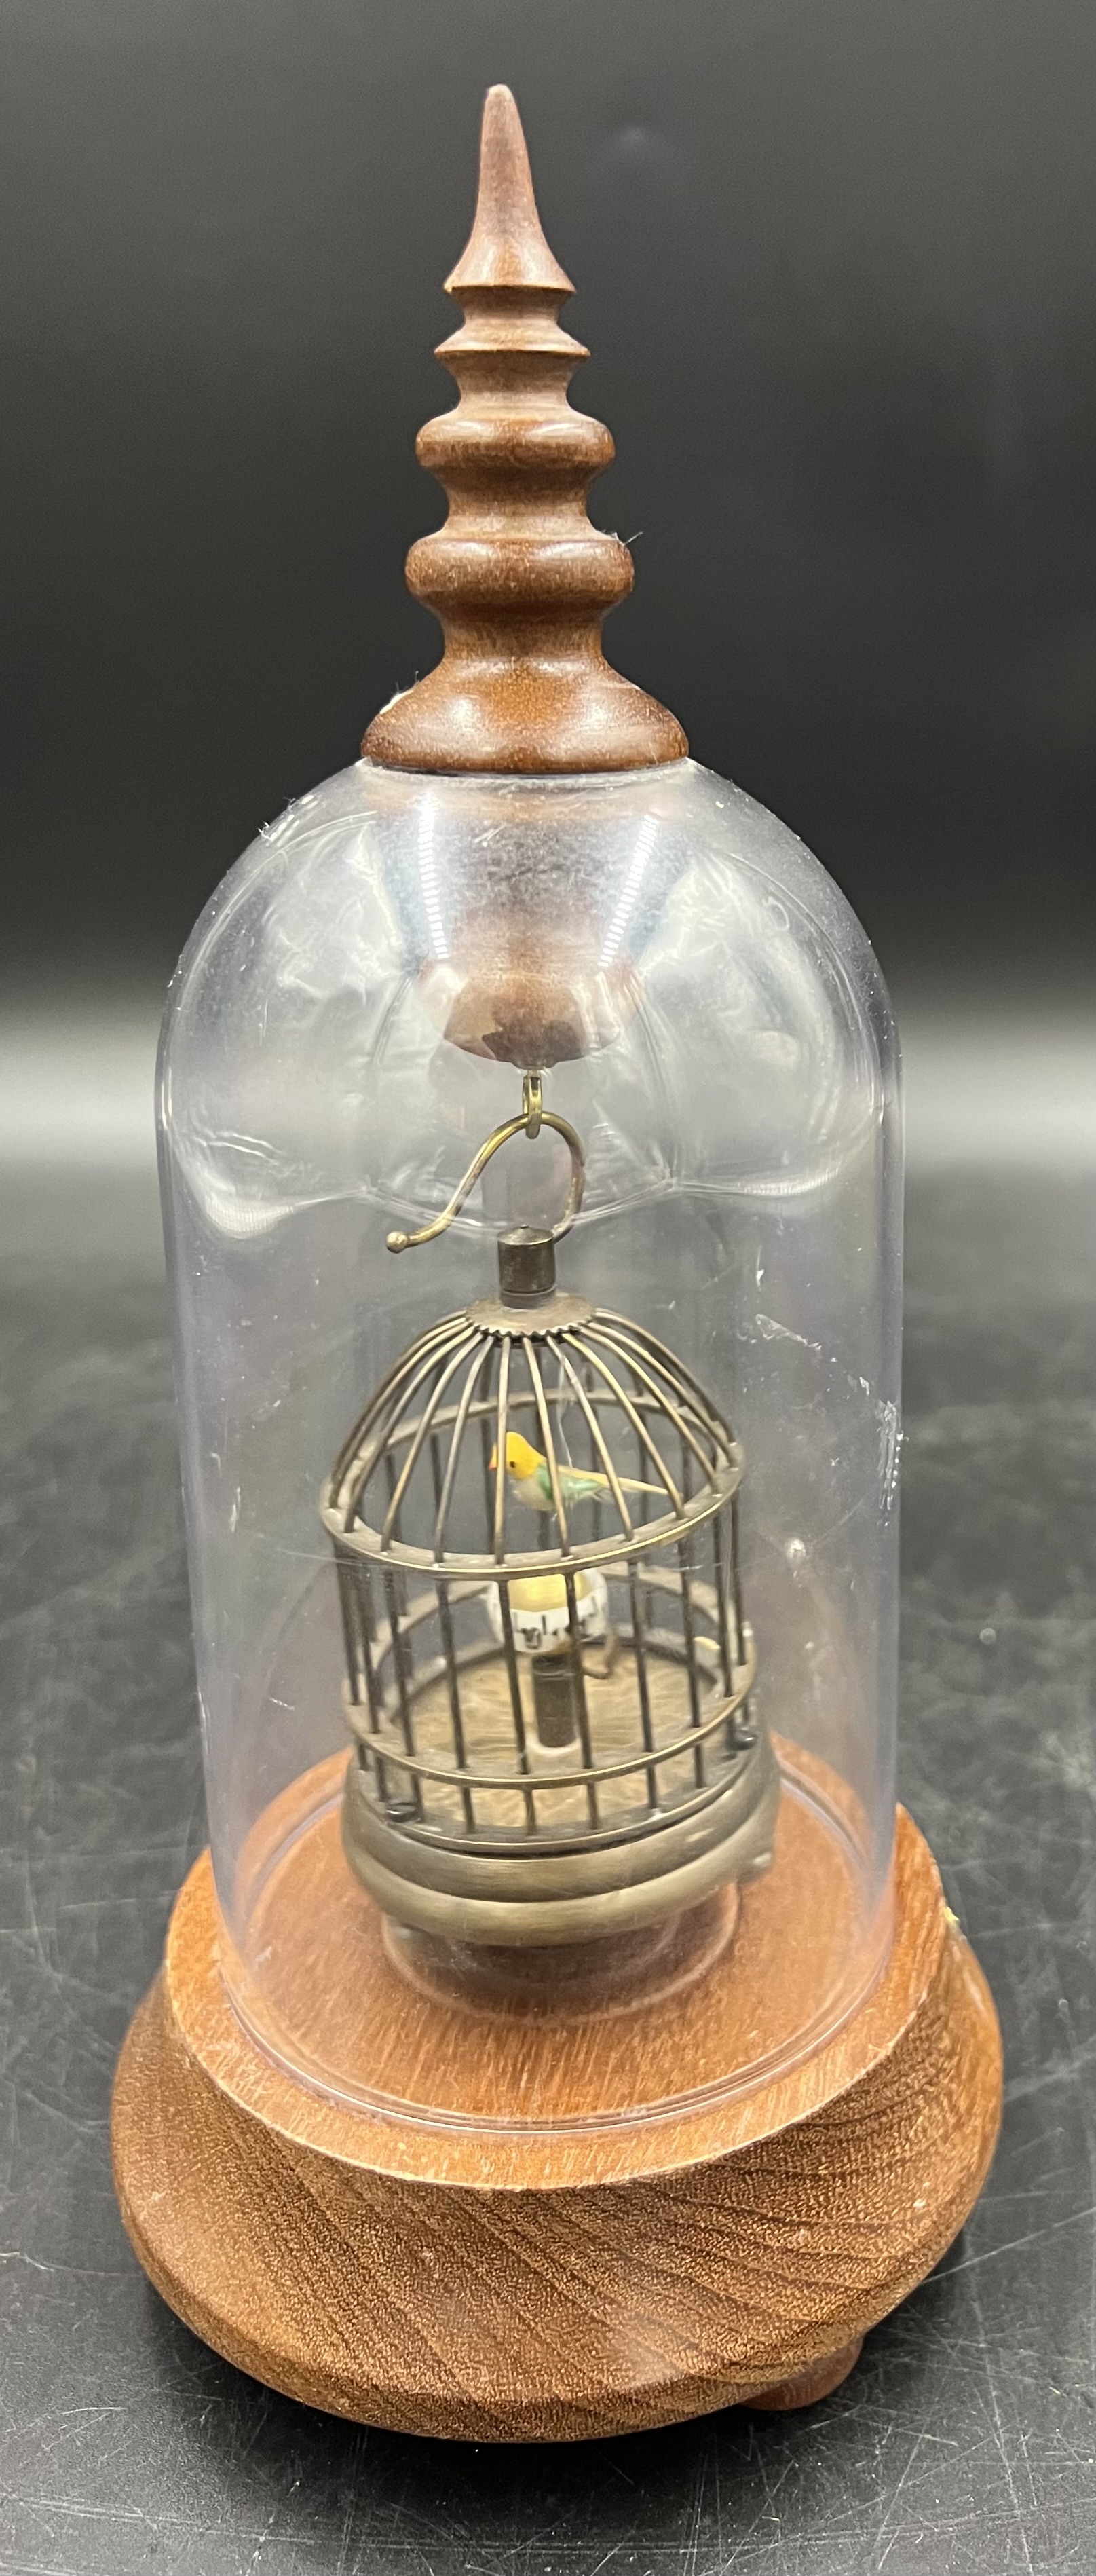 A novelty clock displayed under a clear dome on a wooden base. The vintage style metal birdcage